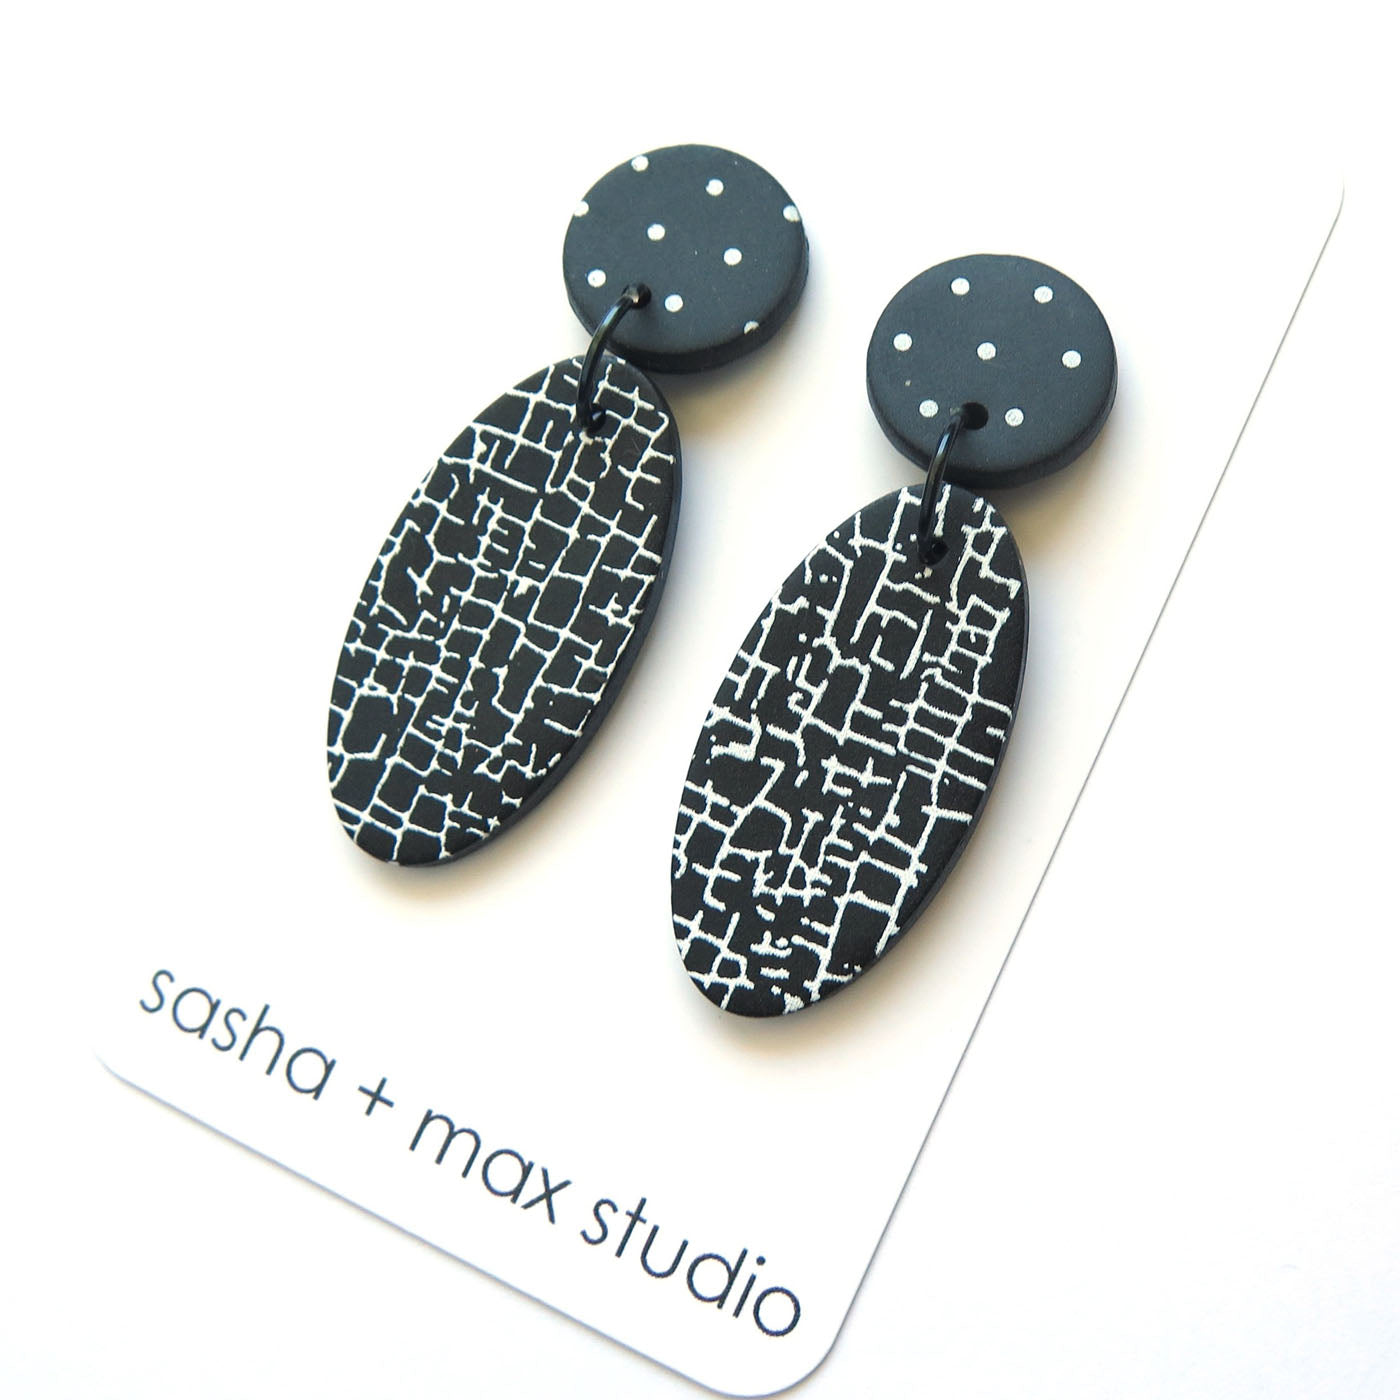 Crackle Black and White Statement Earrings - Large oval